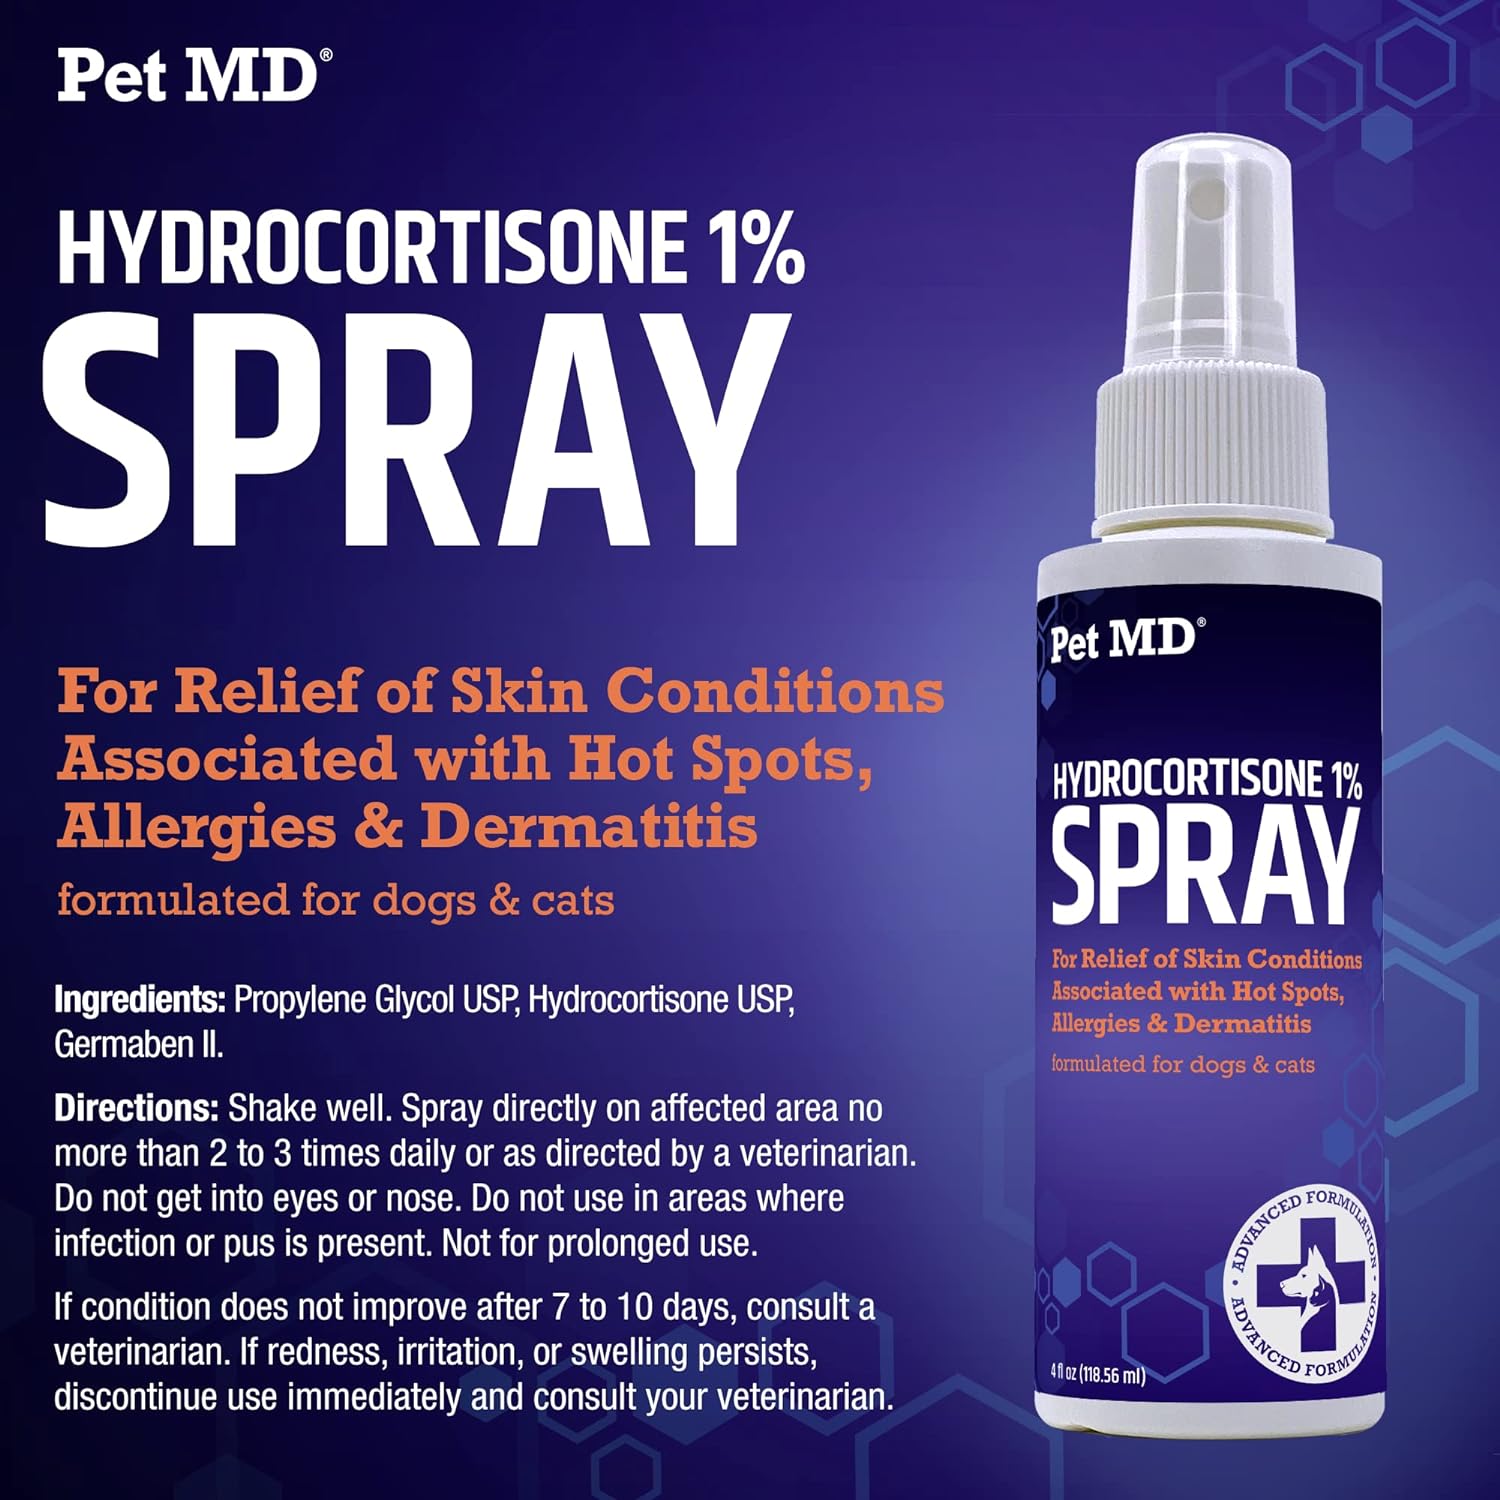 Pet MD Hydrocortisone Spray for Dogs, Cats, Horses - Itch Relief Spray & Hot Spot Treatment for Dogs, Irritated Dry Itchy Skin, Allergies, and Dermatitis - Reduces Topical Inflammation - 4 oz : Pet Supplies